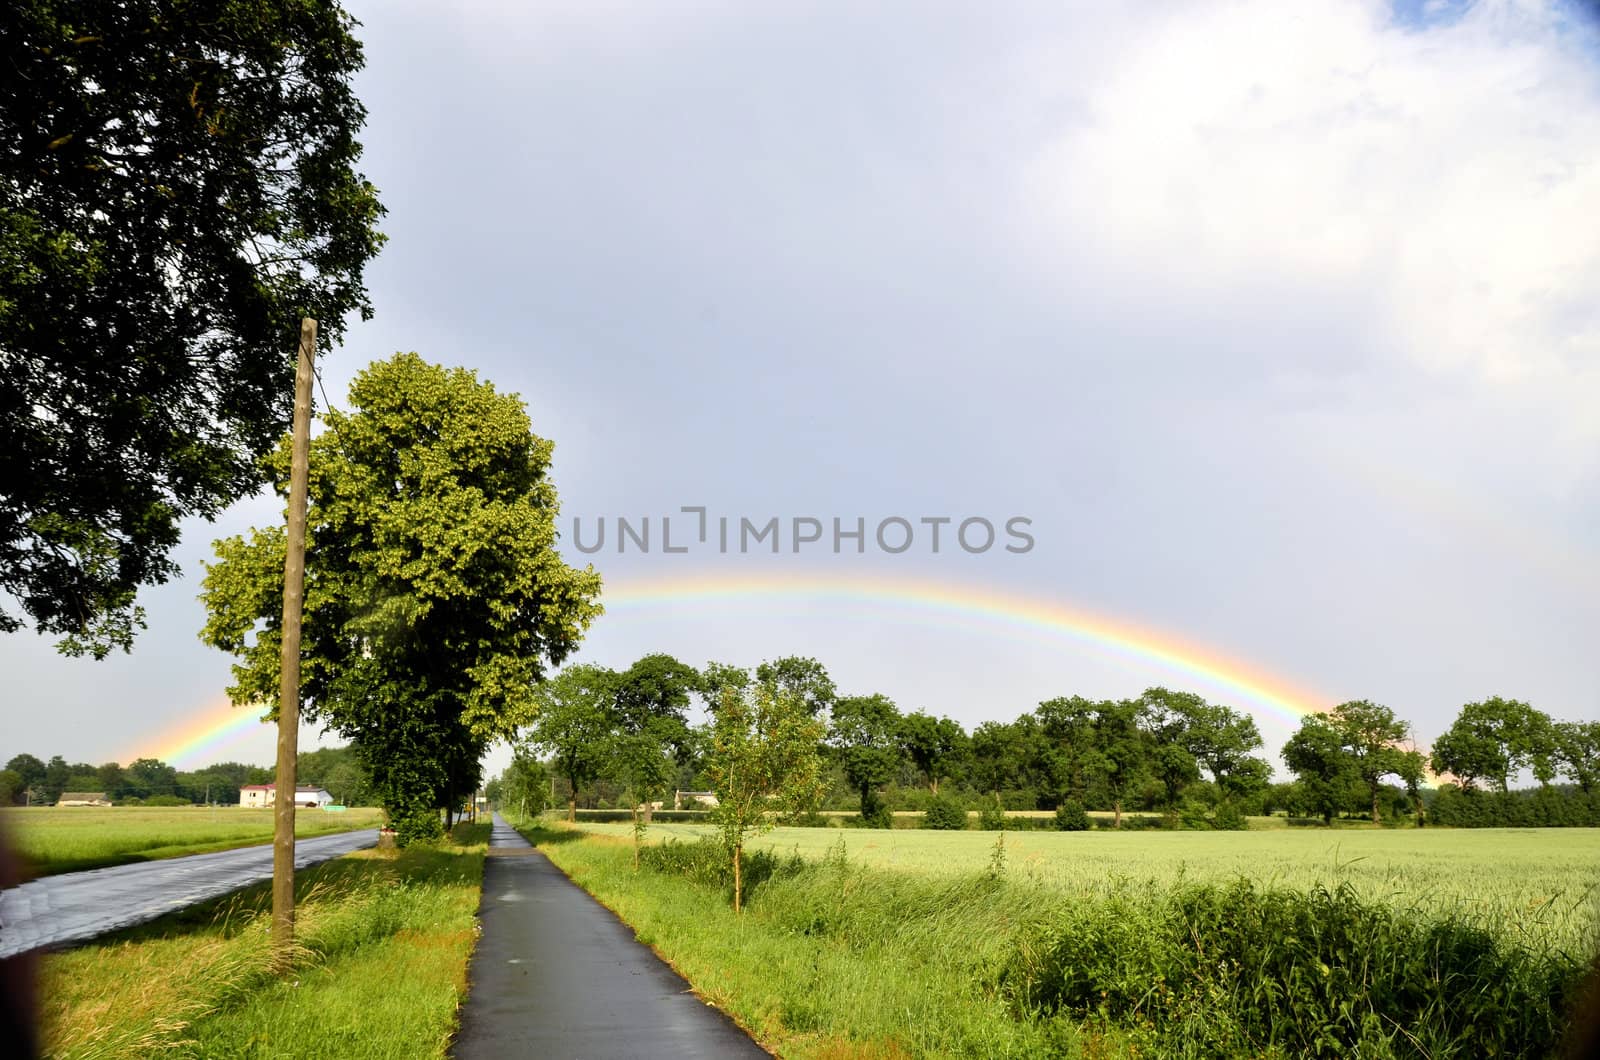 The photo shows a rainbow over the tops of trees growing next to the bike path and the rim of the field, after a sudden, torrential rain.